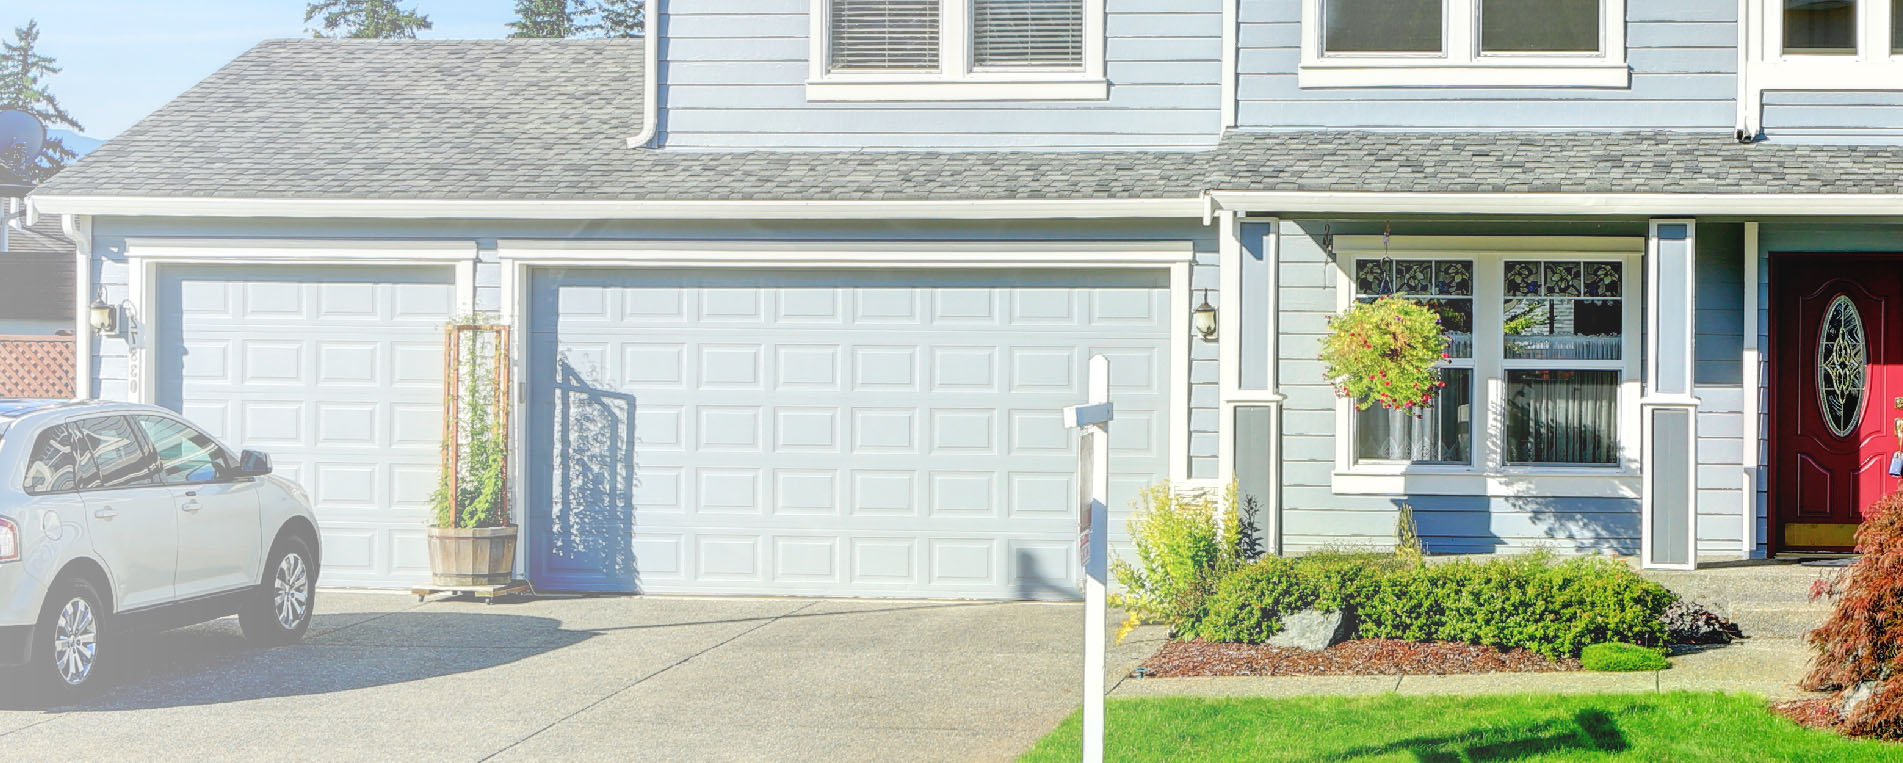 What Causes Garage Door Tracks to Become Damaged, Misaligned or Bent?